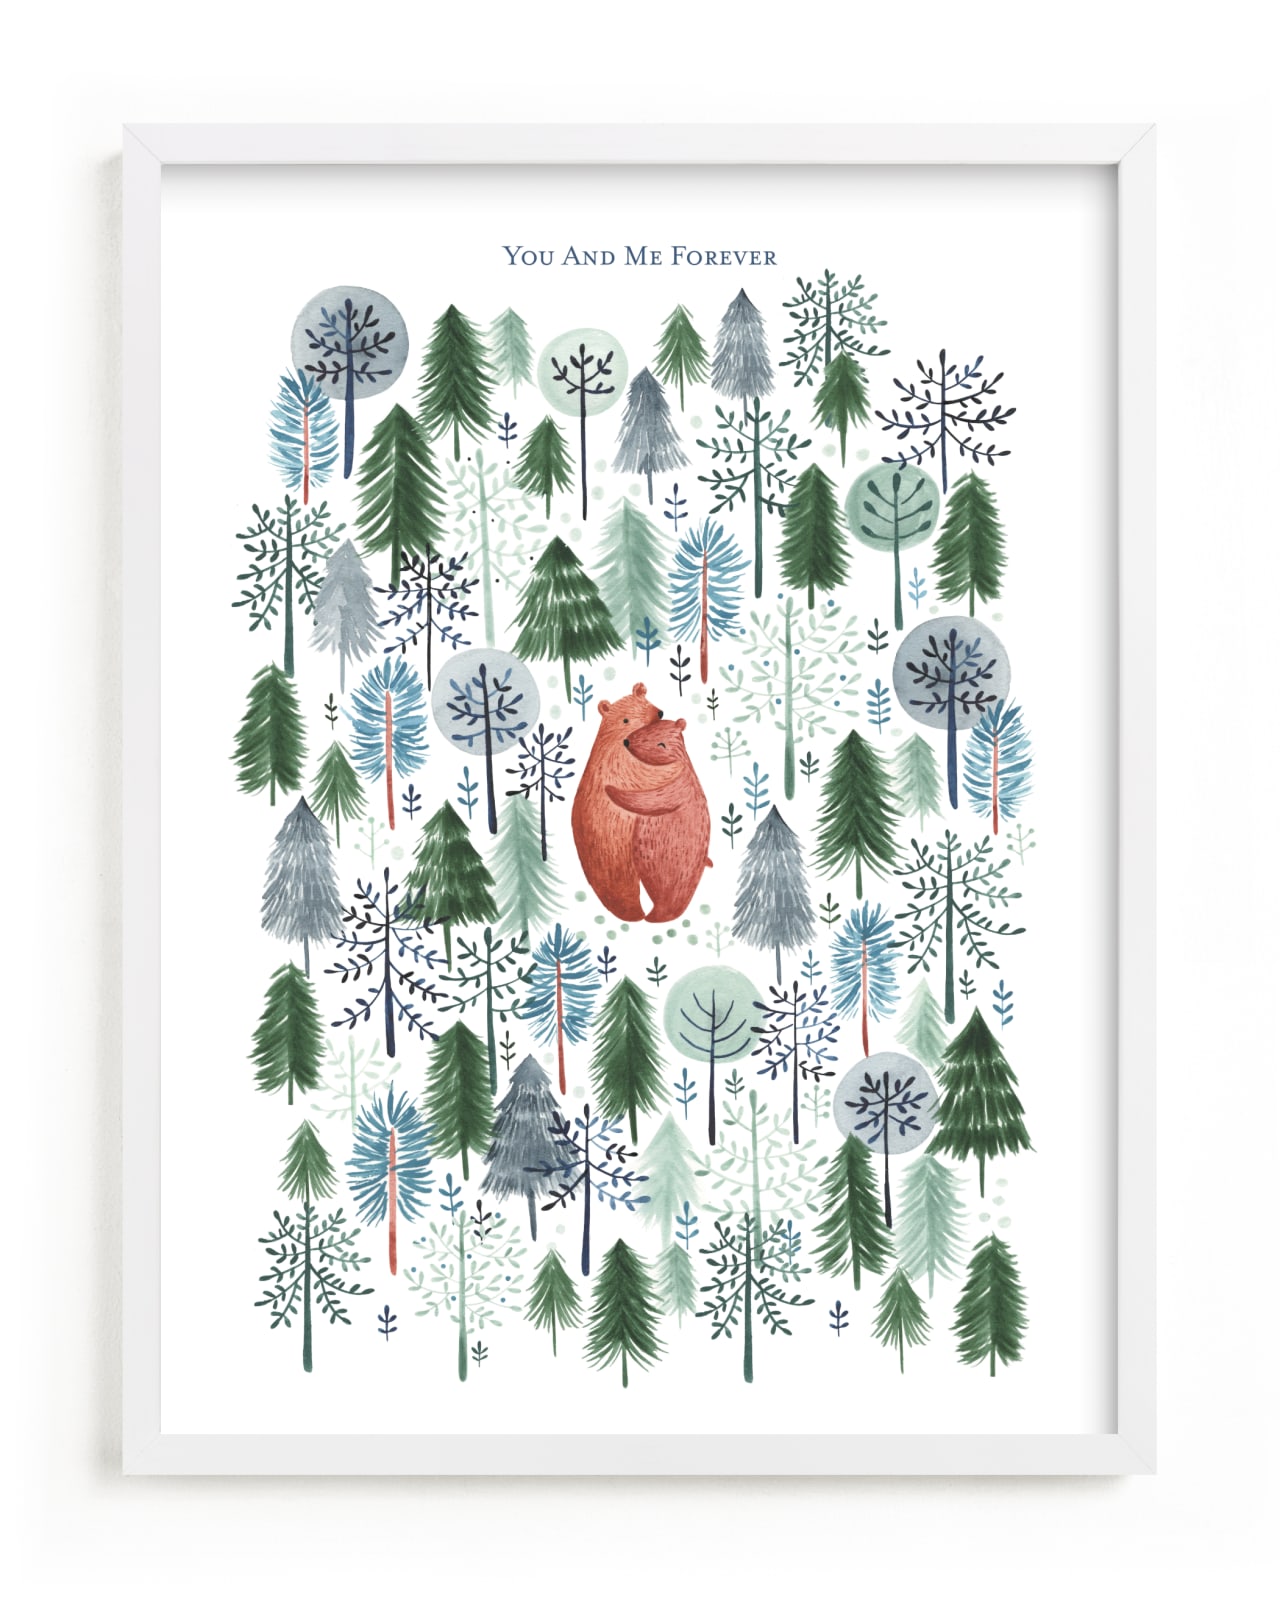 This is a blue nursery wall art by Sarah Knight called Never Alone.